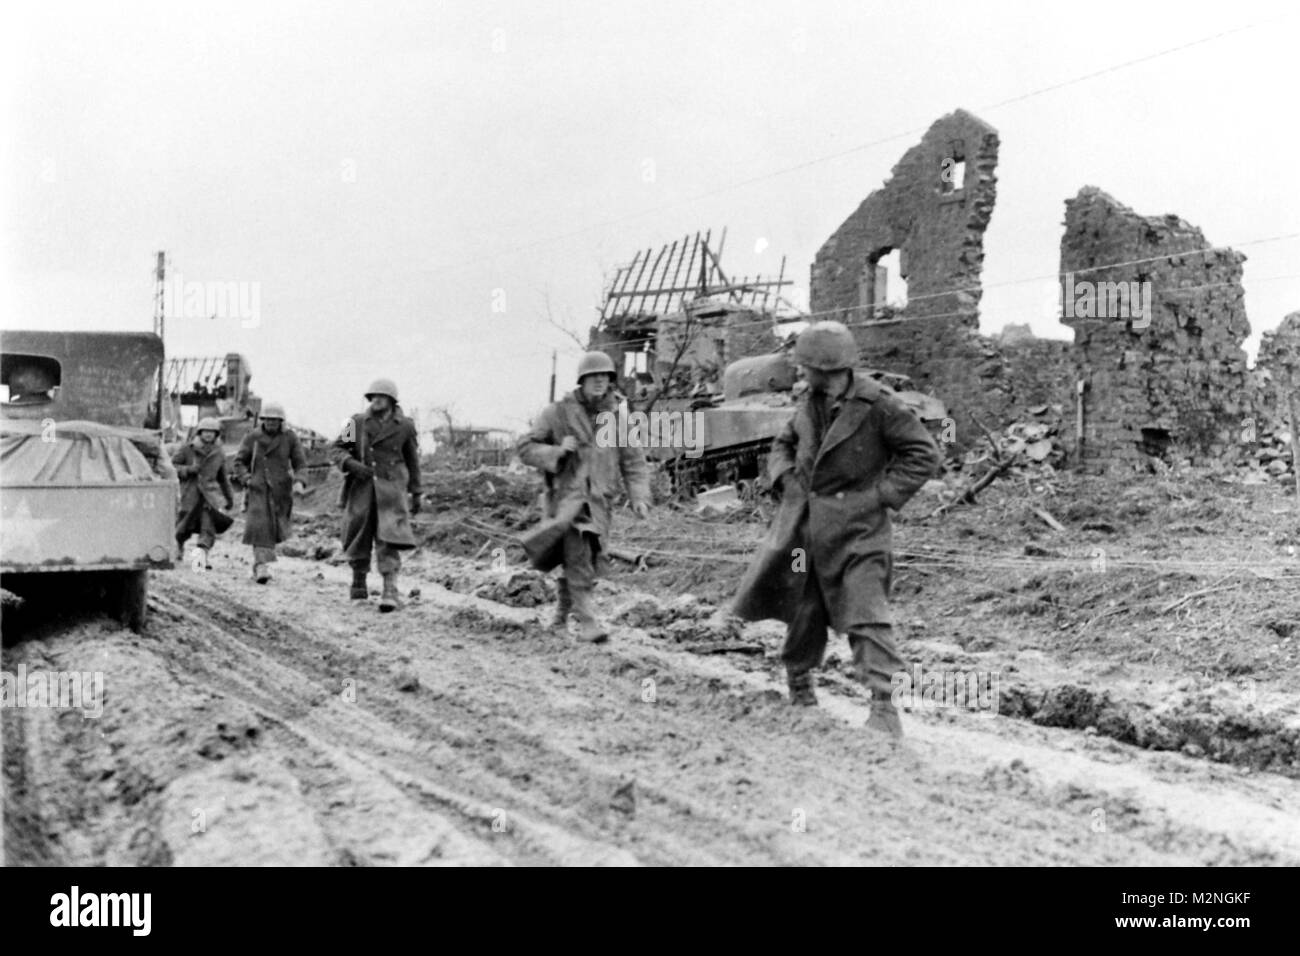 HURTGEN, Germany, December 5, 1944 Soldiers of the Company I, 3rd Battalion, 121st Infantry Regiment move down the main road amid the ruins of Hurtgen, Germany. Photo 270805, National Archives Records Administration (NARA), College Park, Md. Ruins of Hurtgen by Georgia National Guard Stock Photo